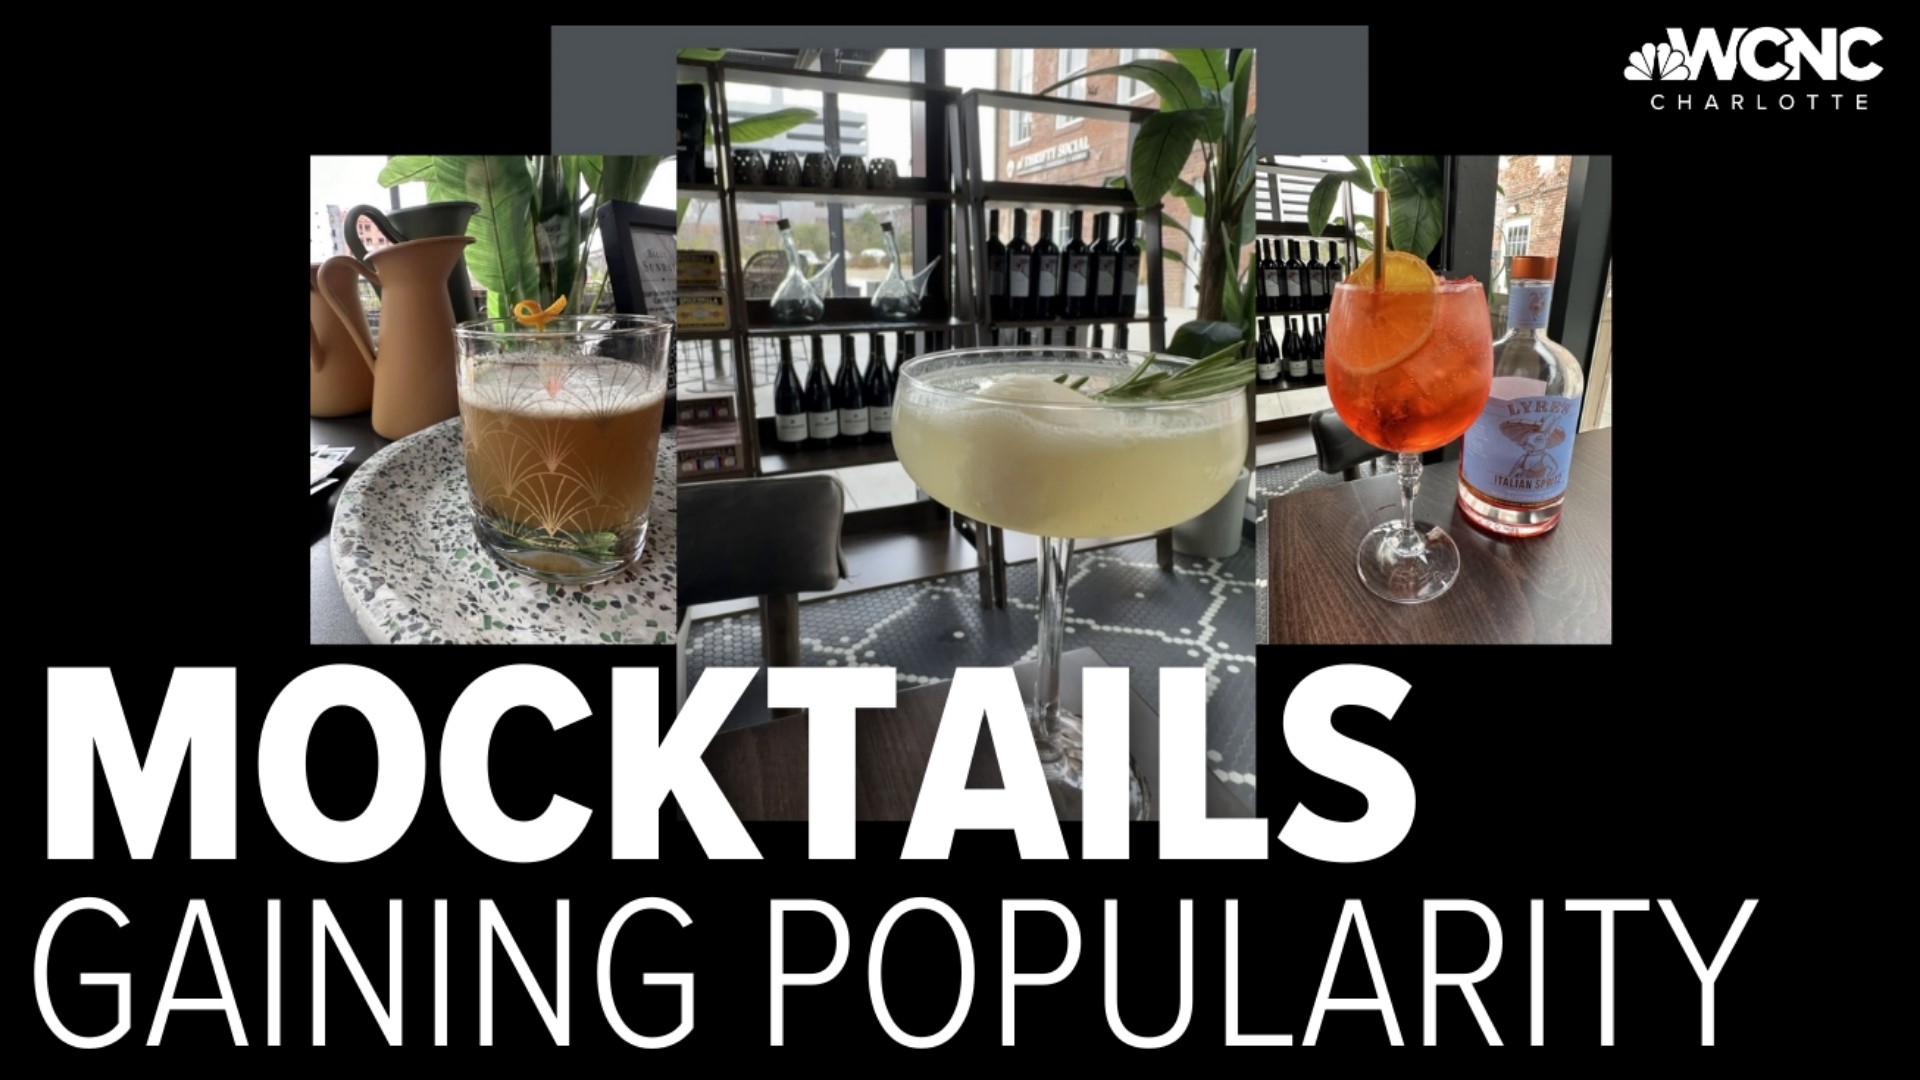 More and more people want nonalcoholic drink options and restaurants are finding new ways to meet that demand.